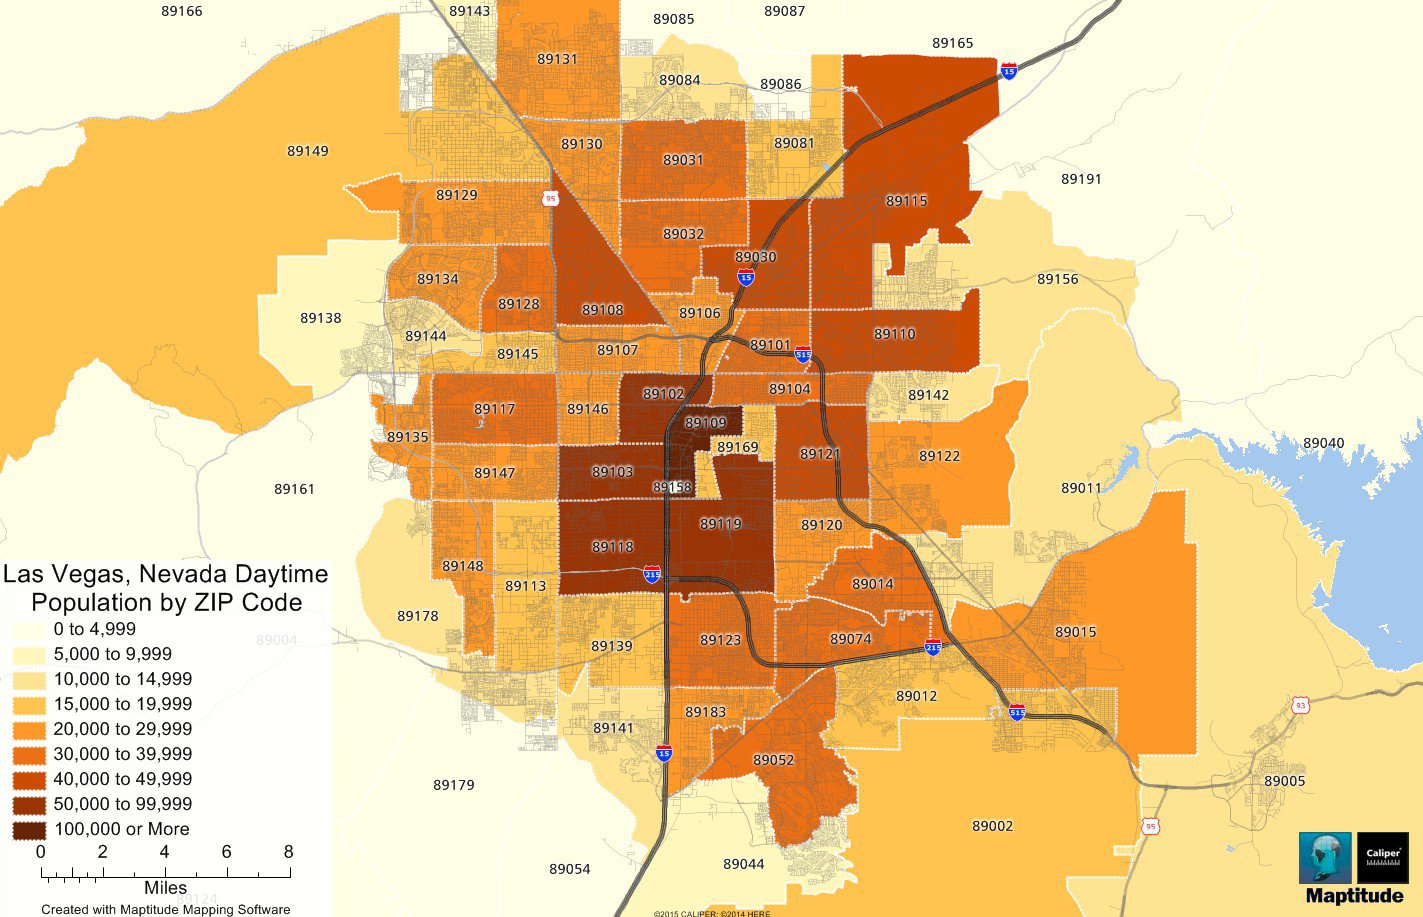 Maptitude mapping software map the daytime population by ZIP Code in Las Vegas NV